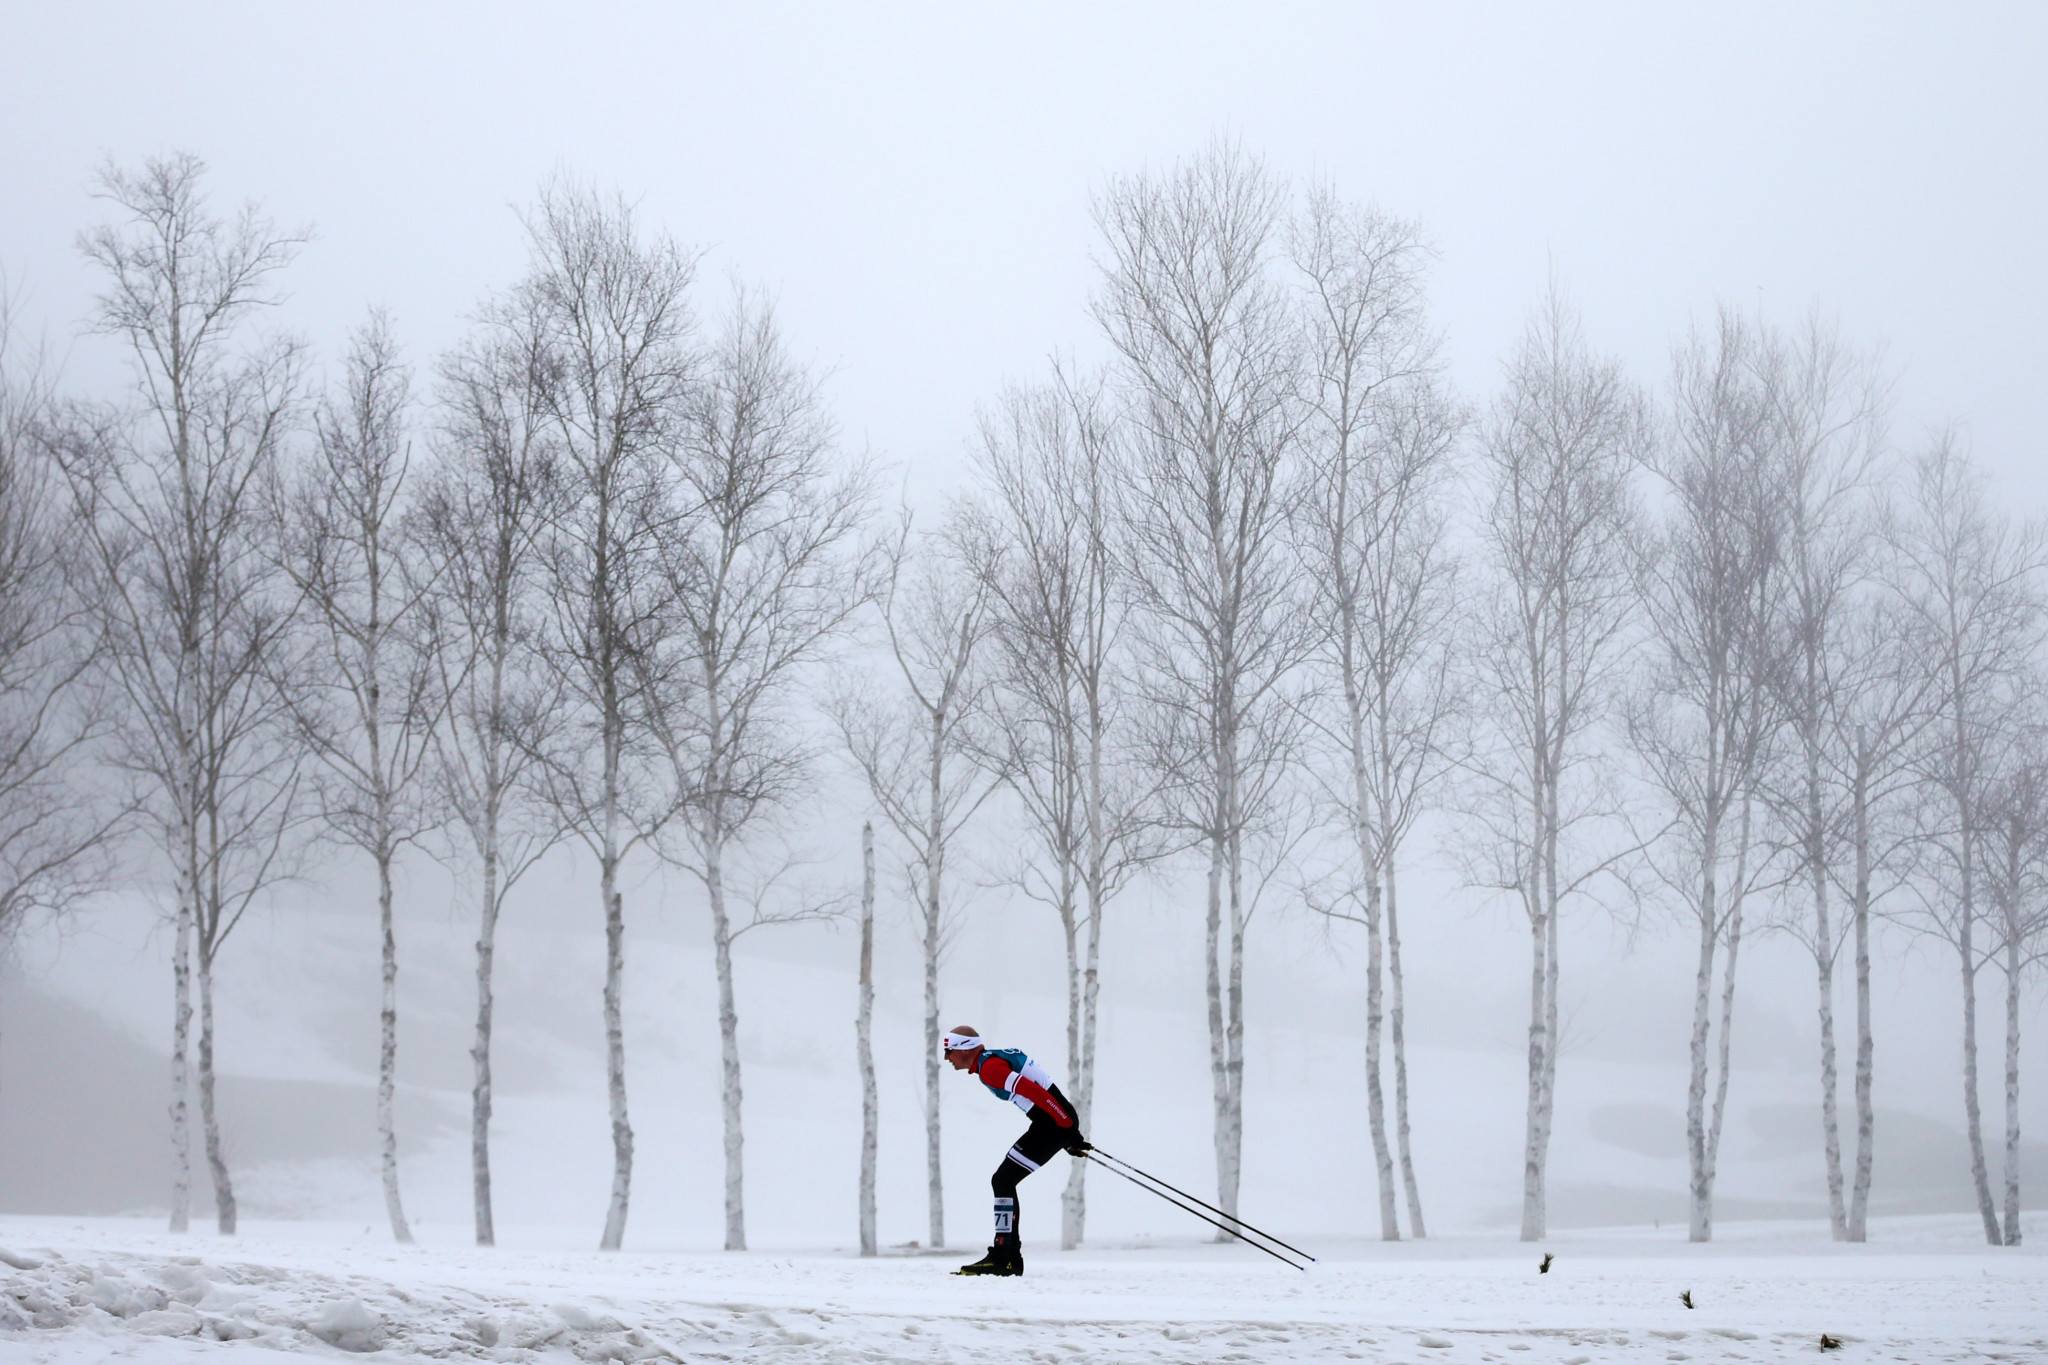 Today marked the last individual races of the World Ski Orienteering Championships ©Getty Images